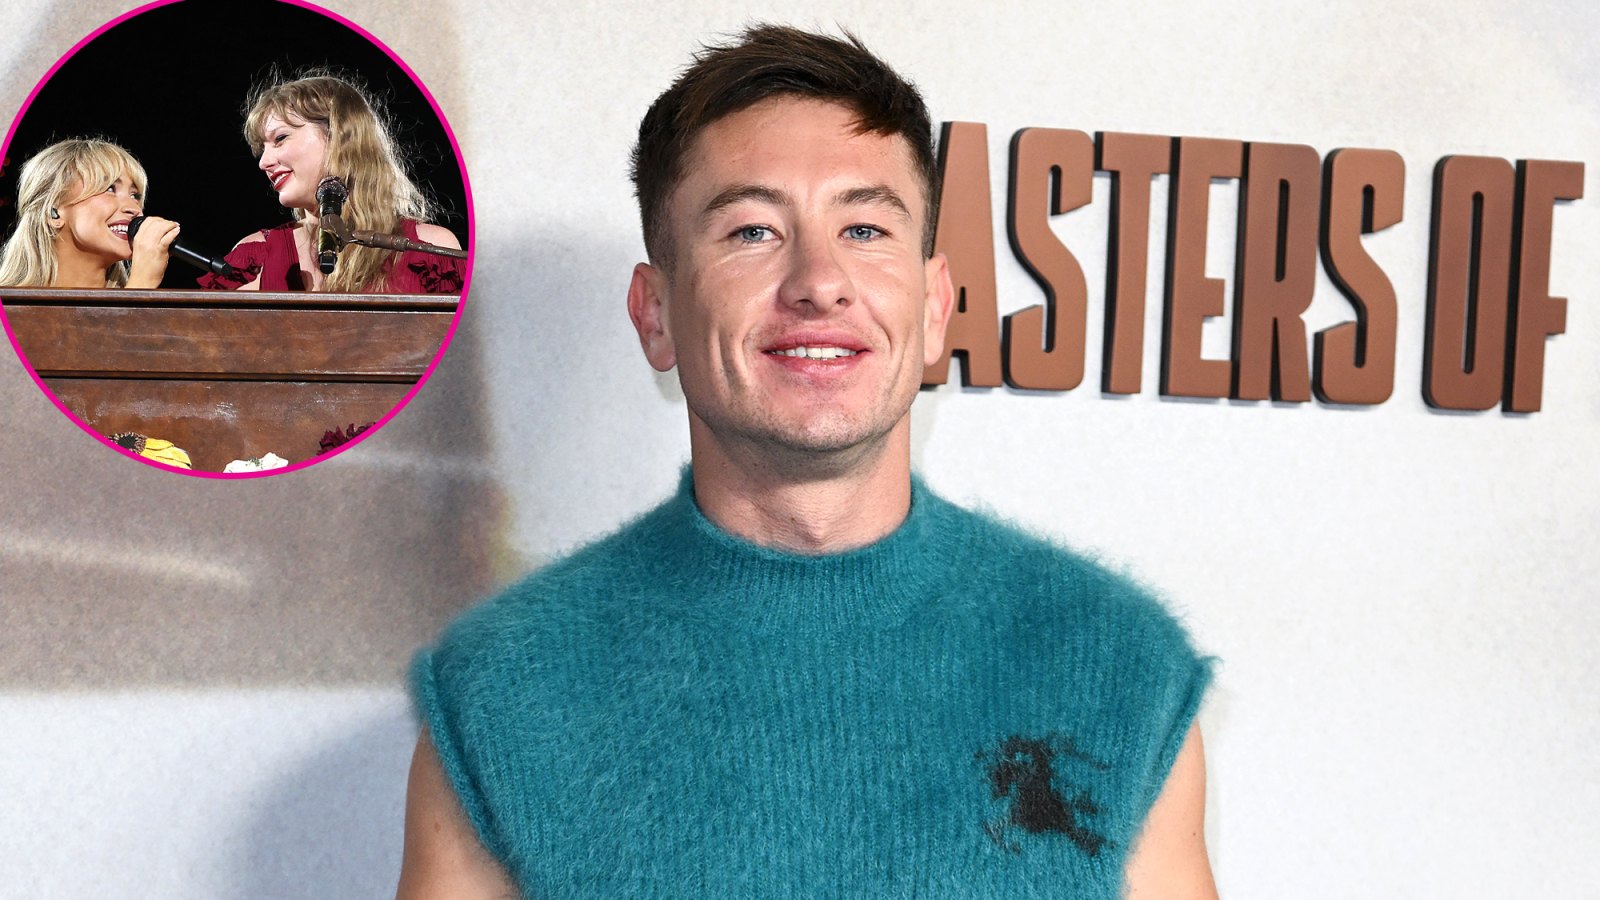 Barry Keoghan’s Reaction to Sabrina Carpenter's Duet With Taylor Swift Further Fuels Romance Rumors